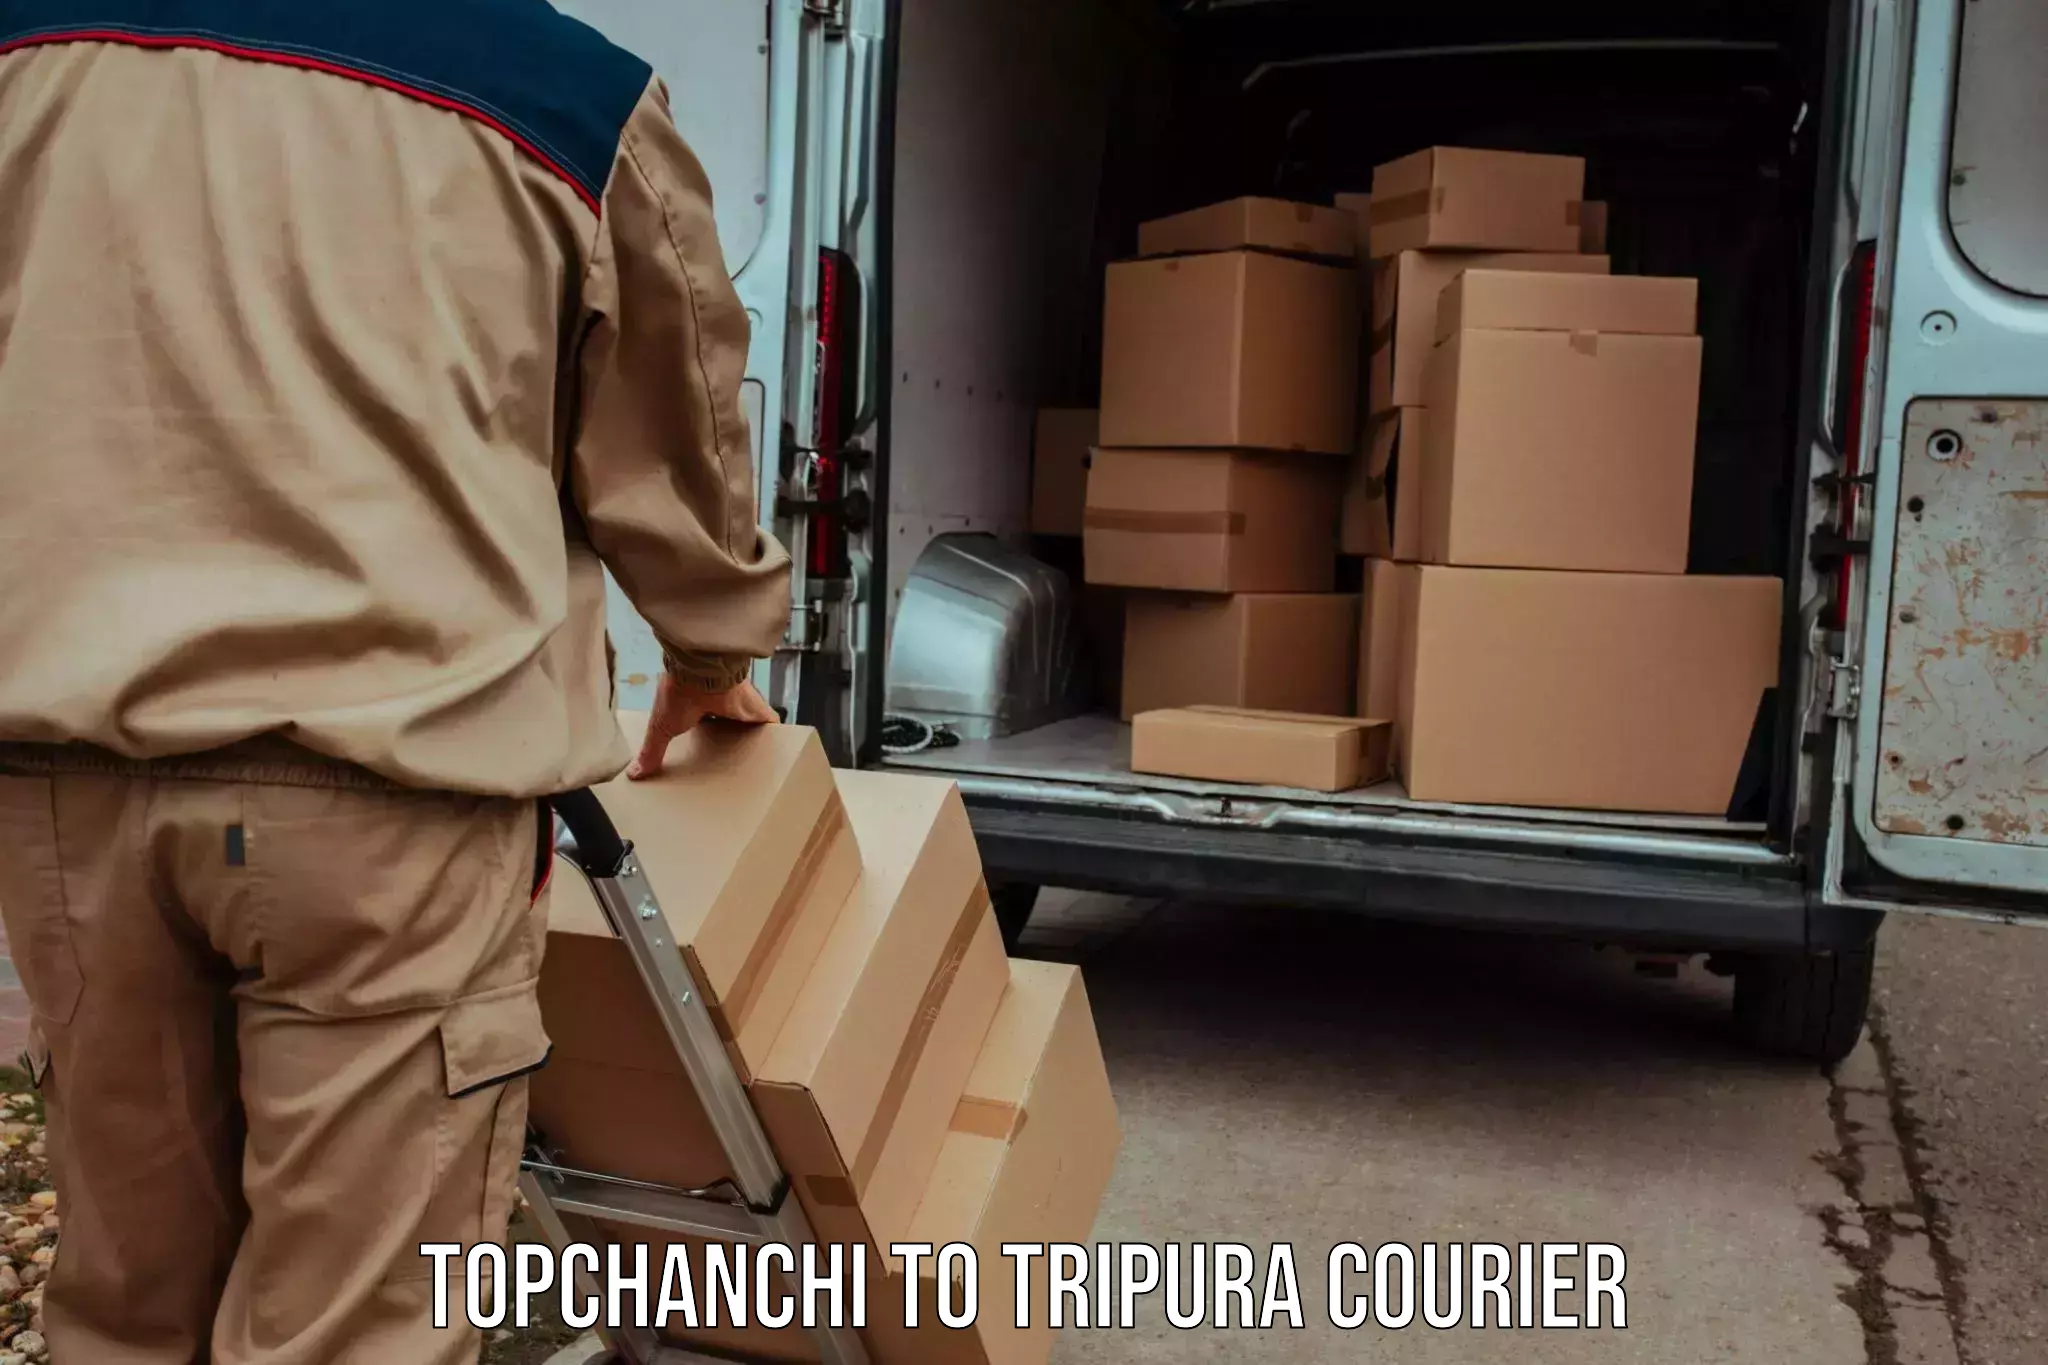 State-of-the-art courier technology Topchanchi to Tripura